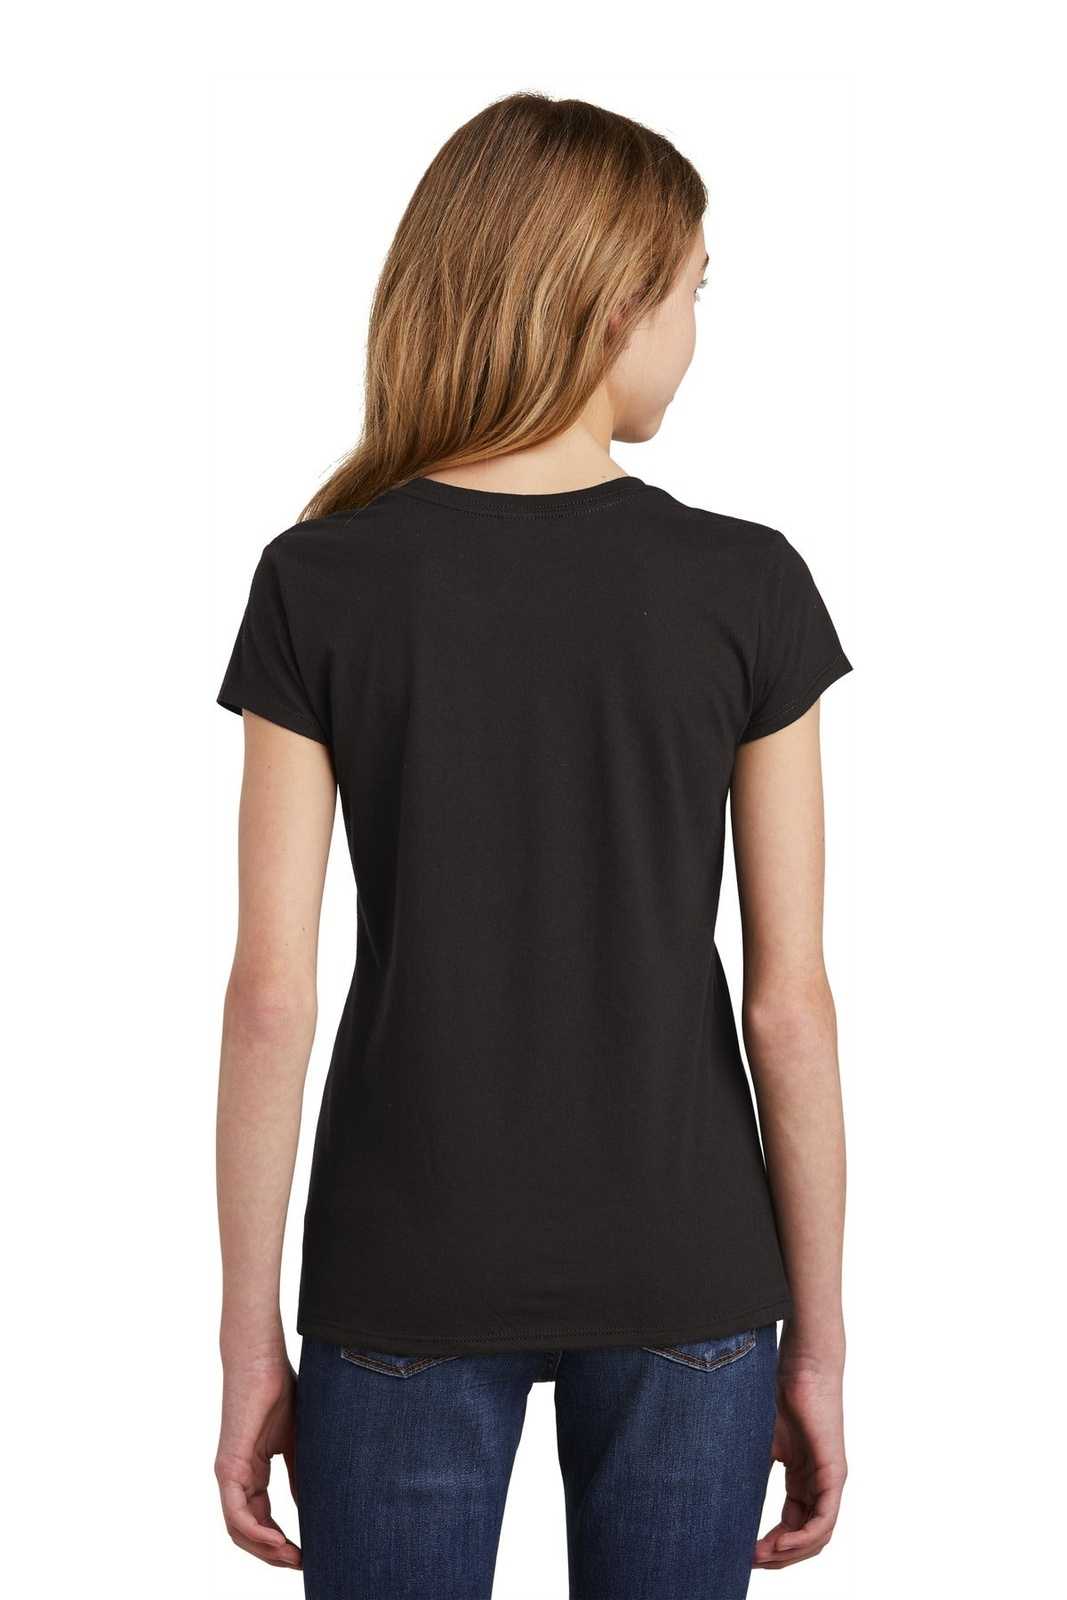 District DT6001YG Girls Very Important Tee - Black - HIT a Double - 1